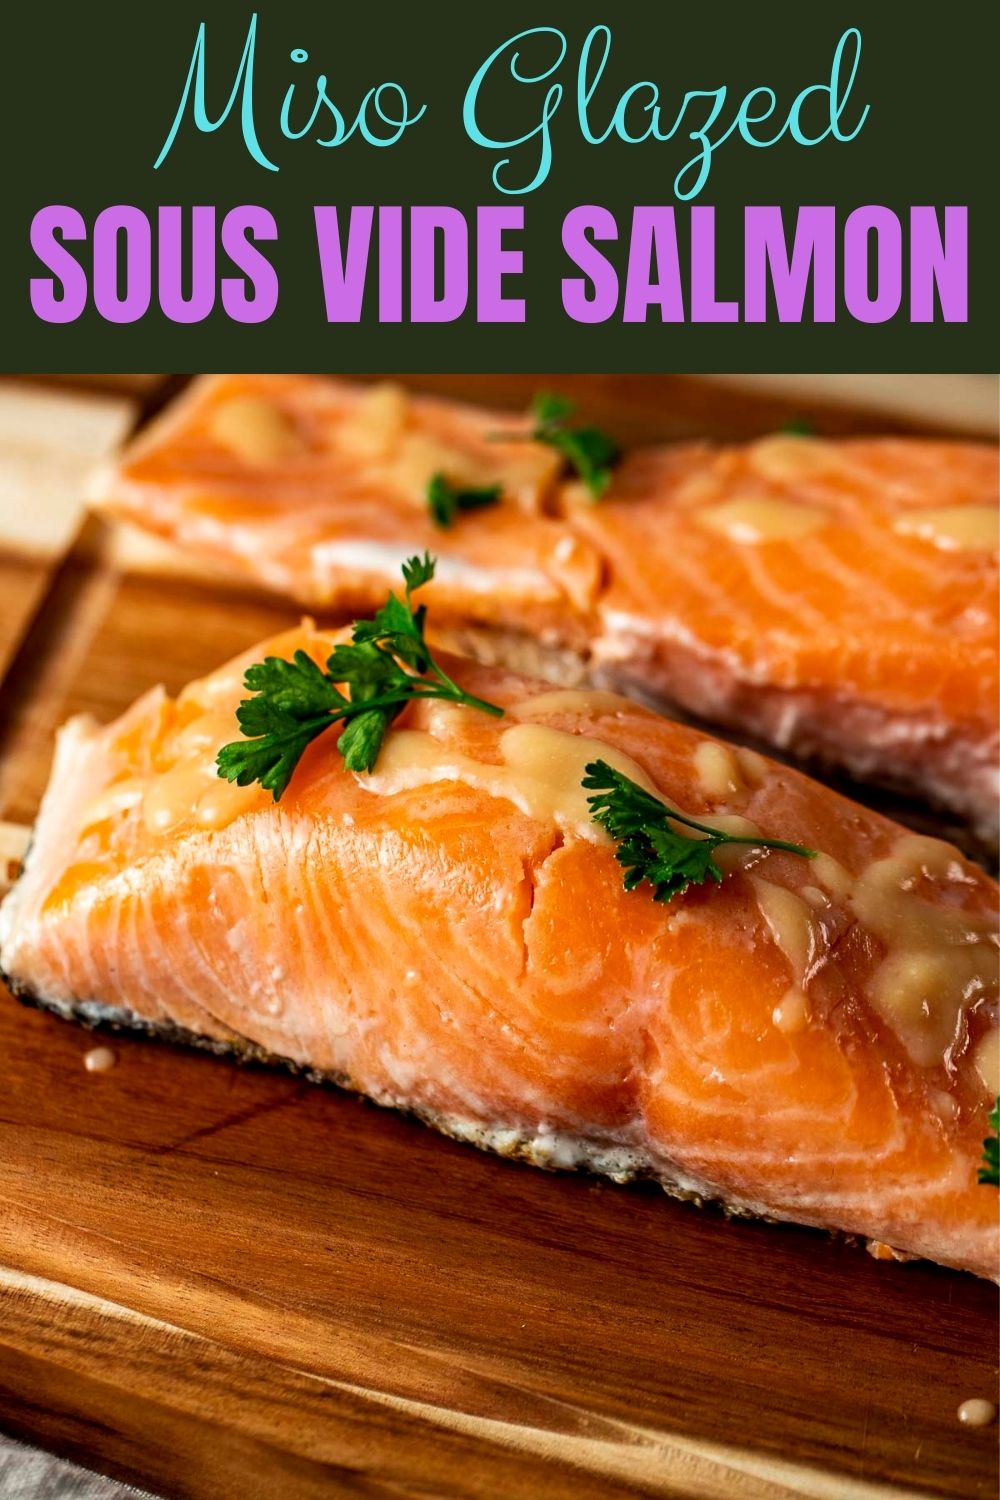 Sous Vide Salmon with Pineapple Miso Glaze